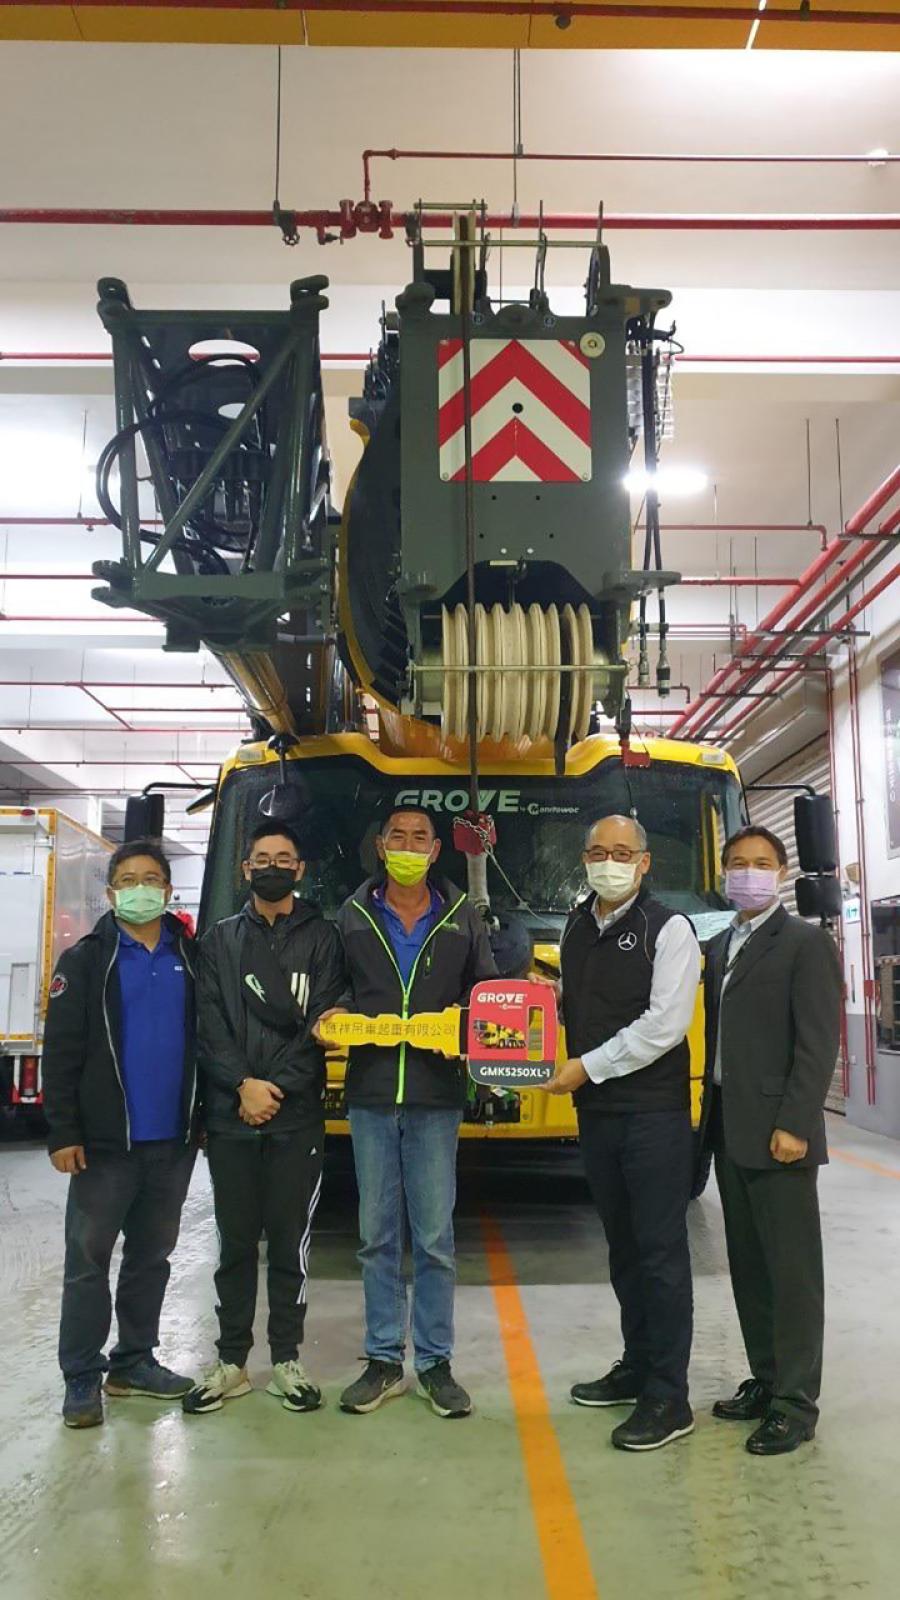 Celebrating the delivery (L-R) are Leon Huang, Champion Auto; Tony Lin, Huixiang Crane Lifting; Lin De Siang, Huixiang Crane Lifting; Terry Lee, Champion Auto; and Henri Lee, Champion Auto.